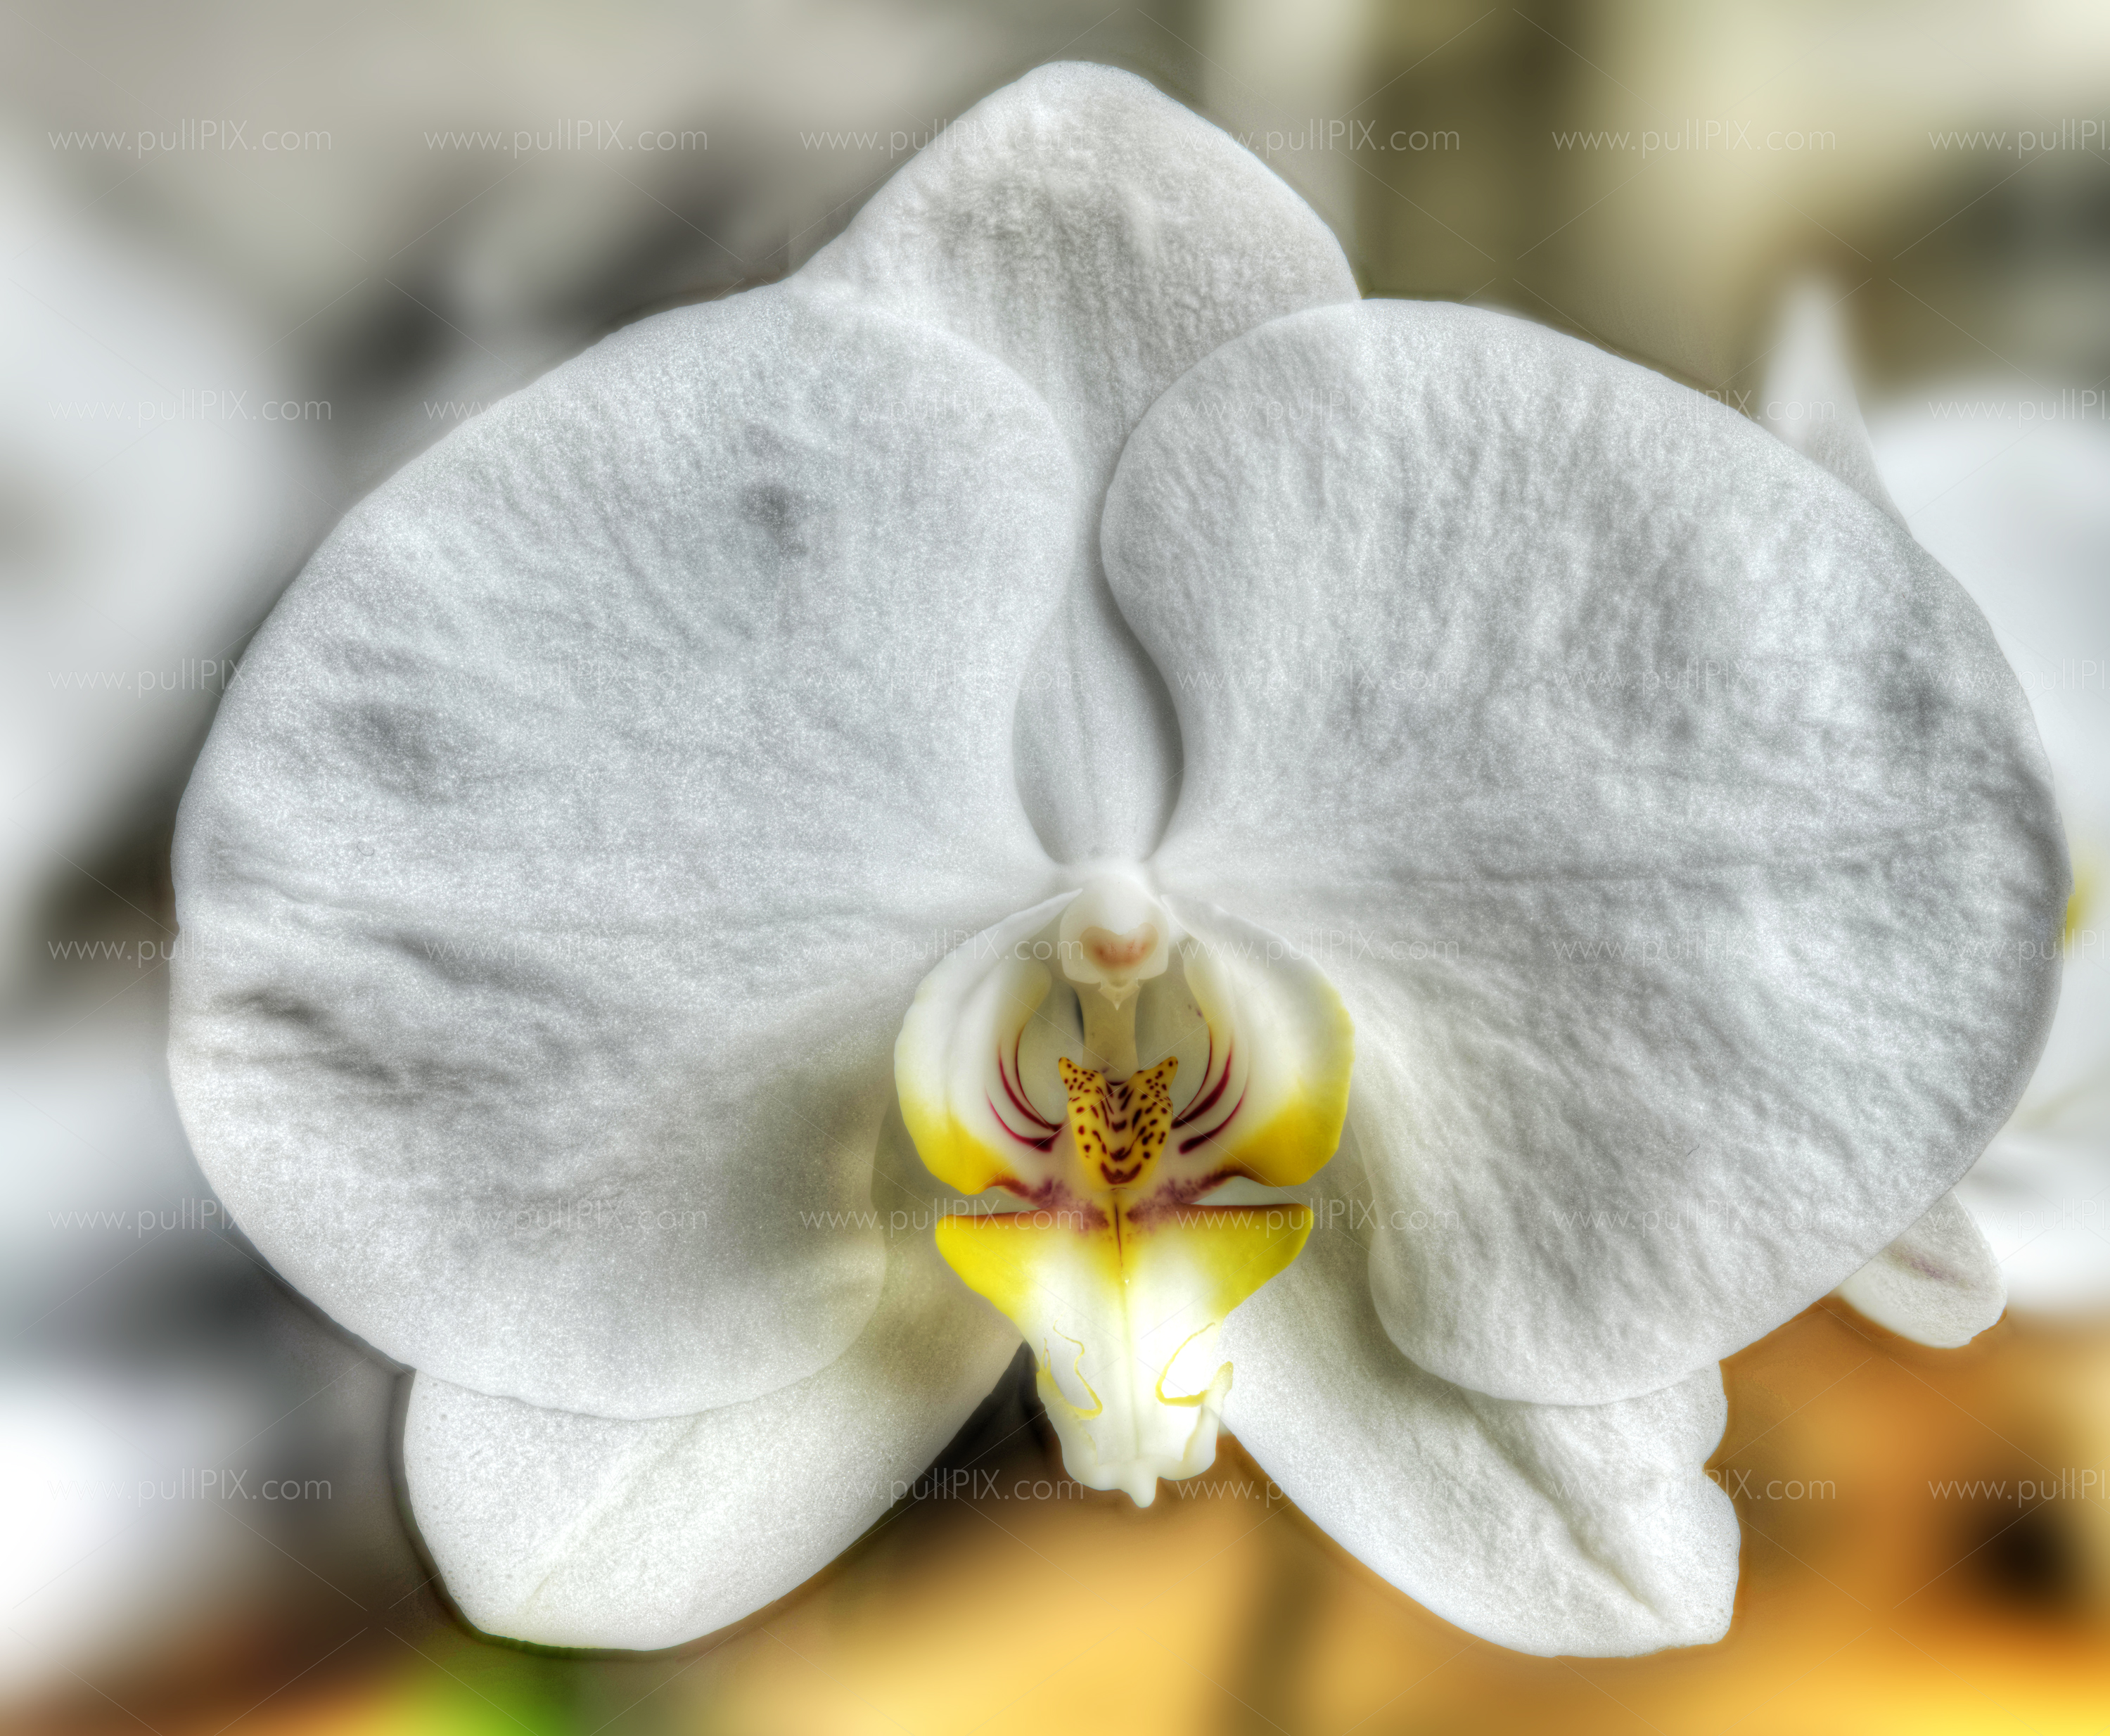 Preview weisse orchidee_HDR.jpg